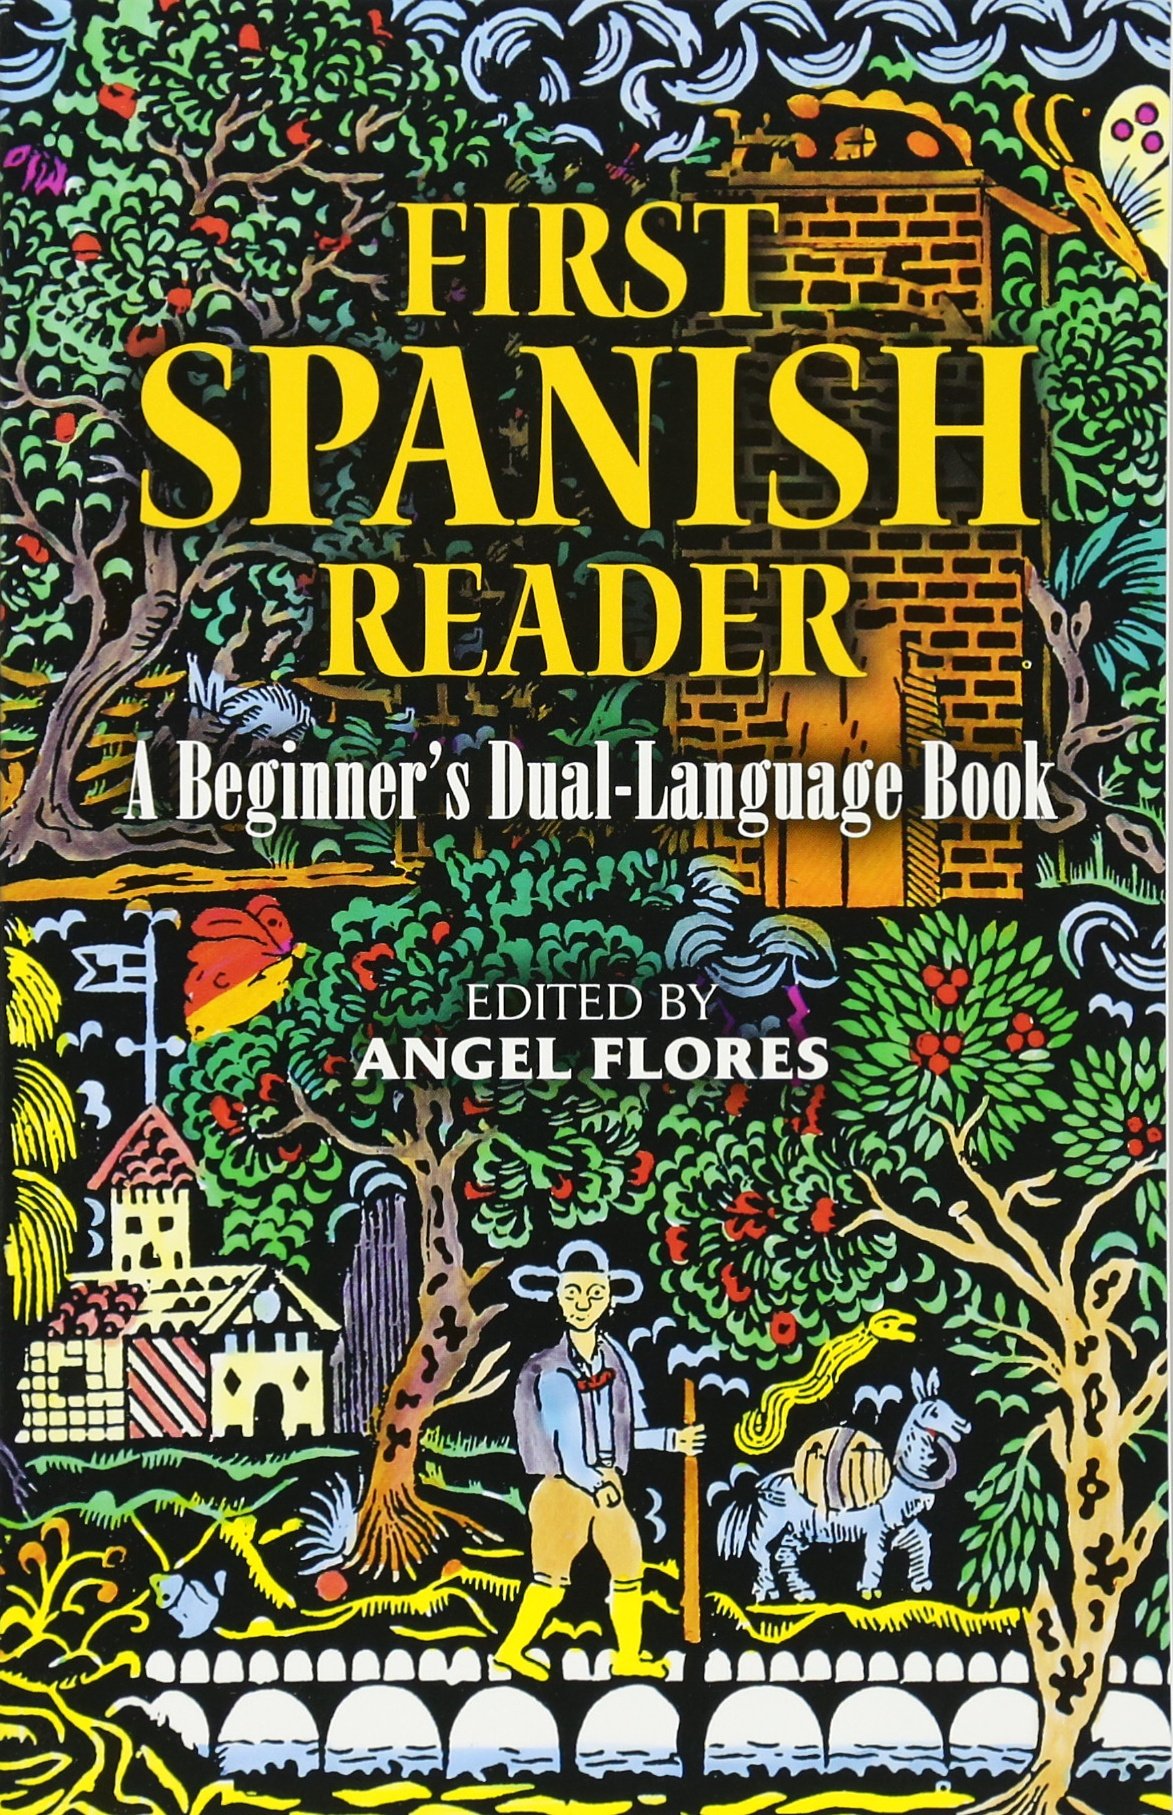 First Spanish Reader (EBook, Spanish language, 1988, Dover Publications)